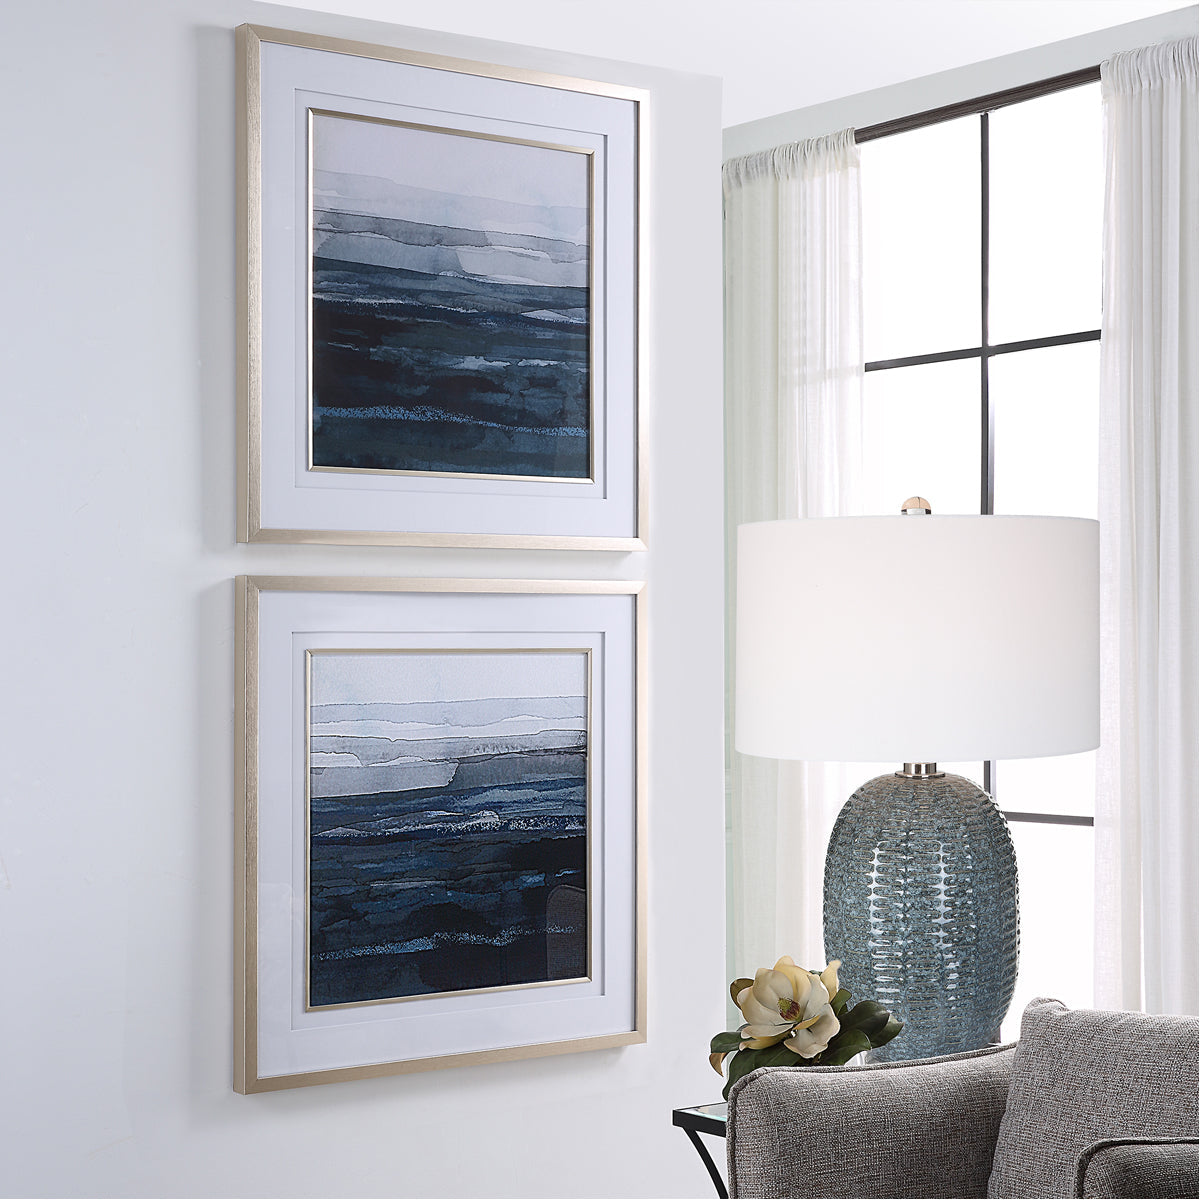 Uttermost Rising Blue Abstract Framed Prints, 2-Piece Set